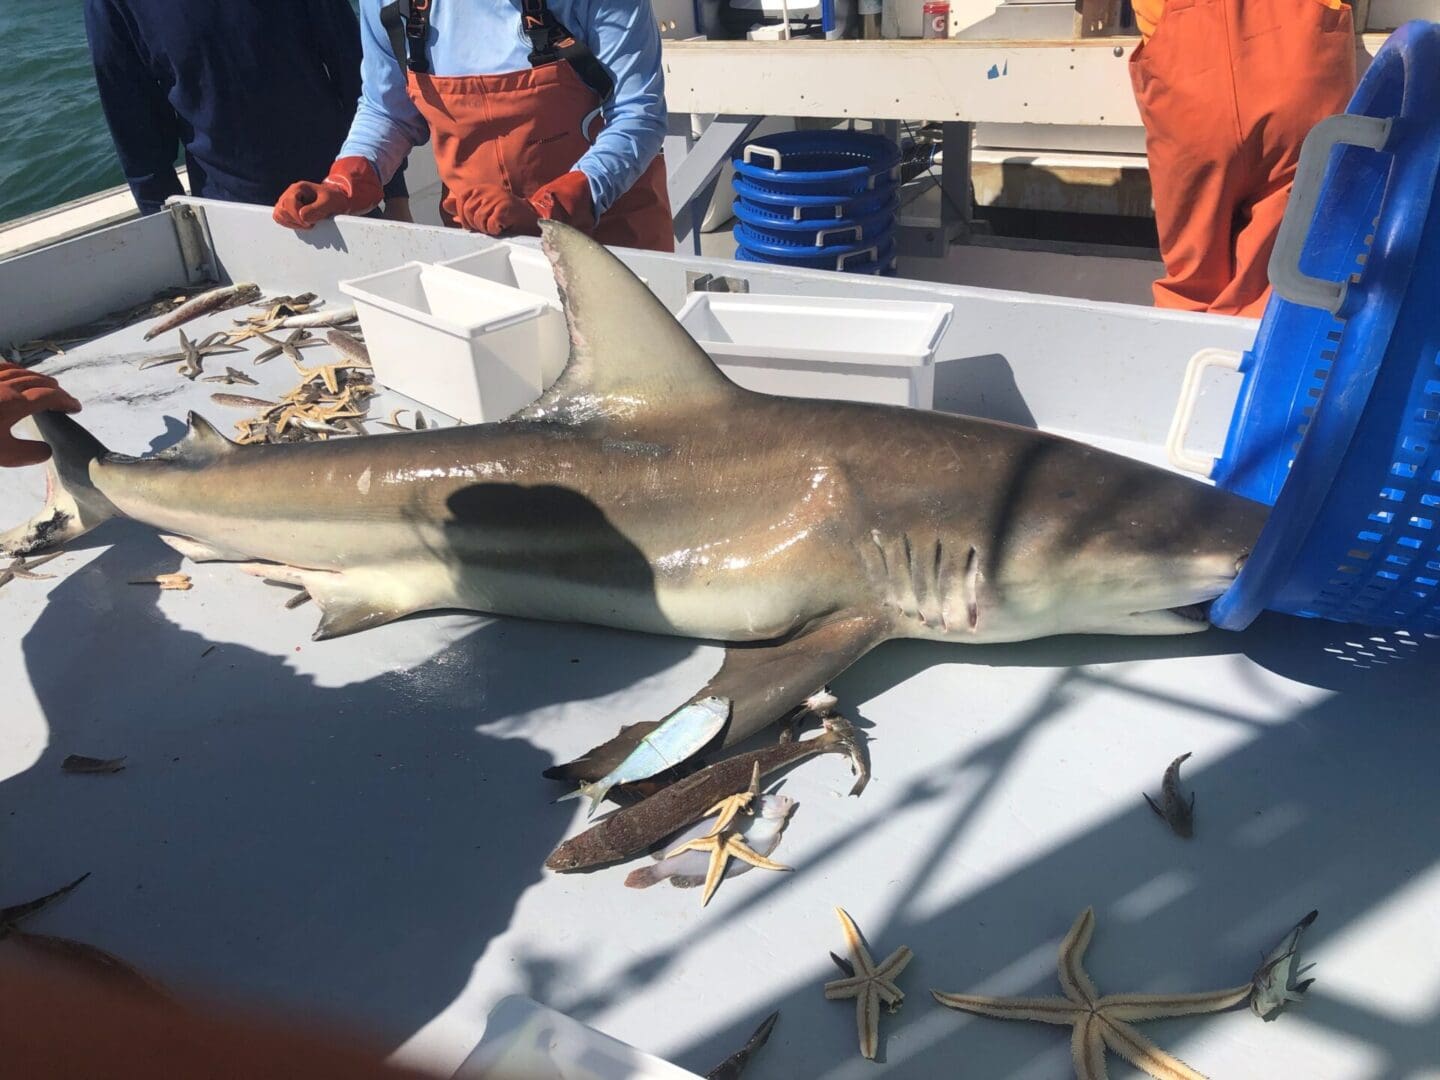 A shark is sitting on the deck of a boat.